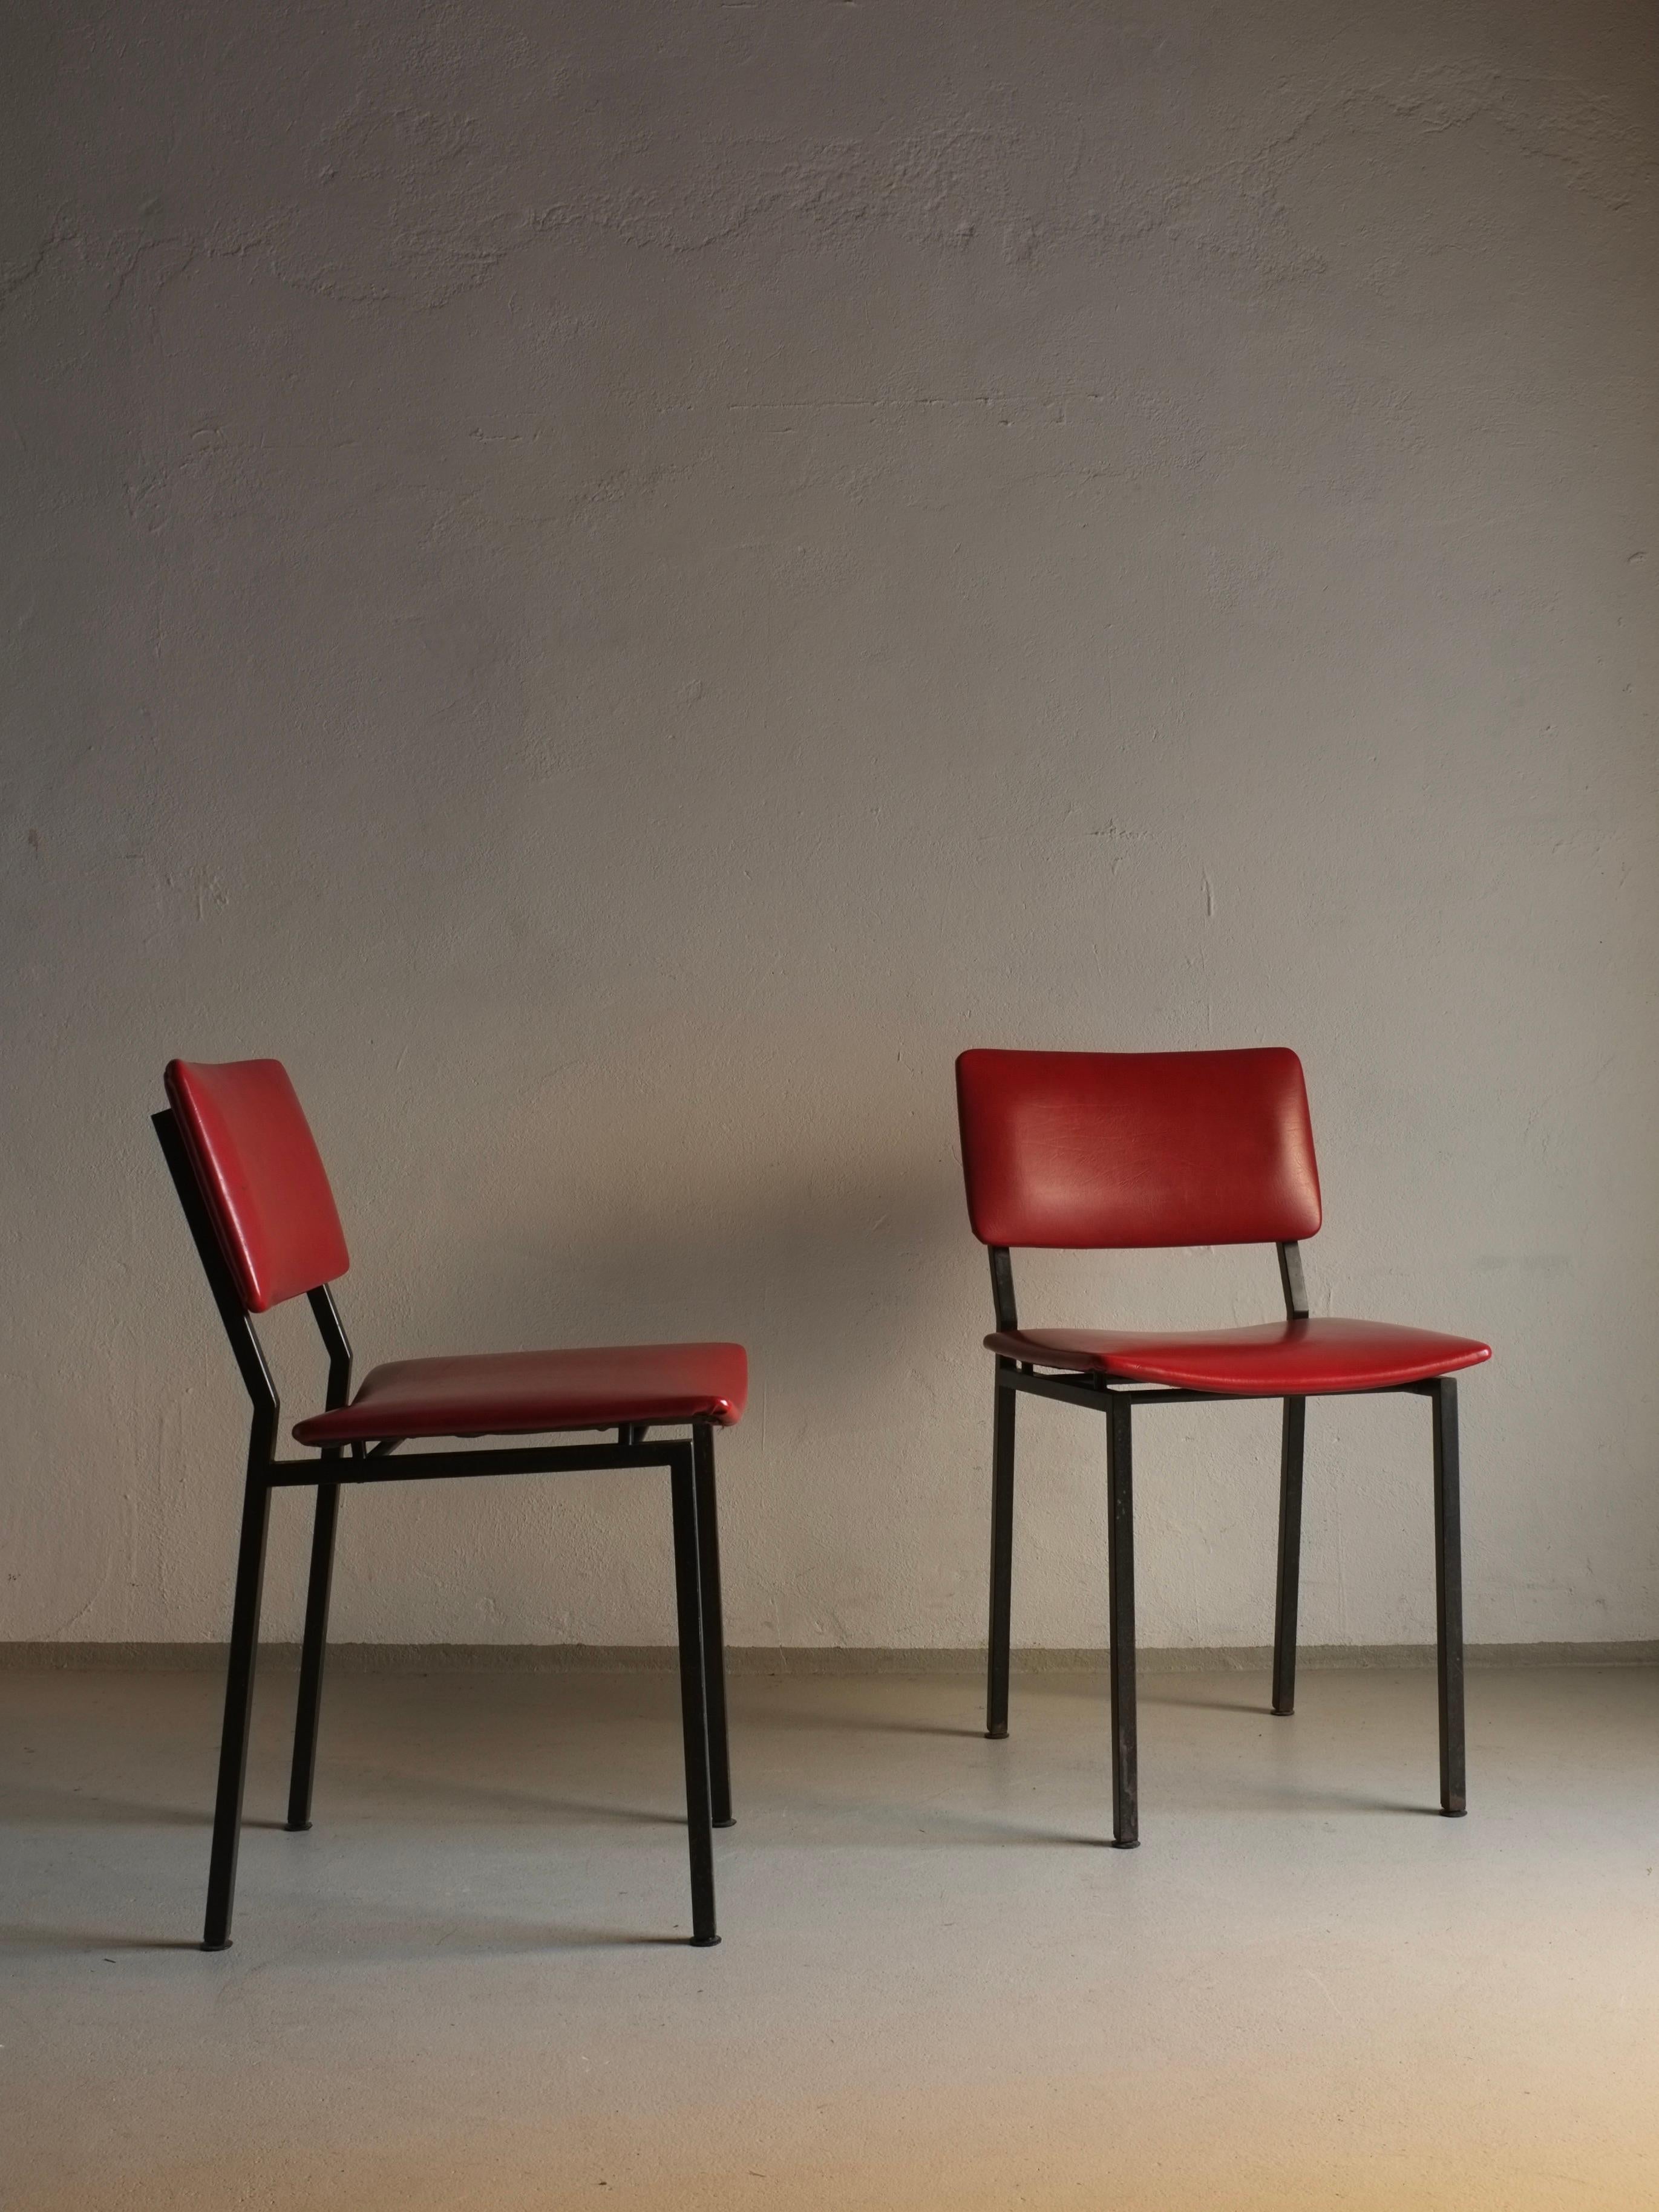 Set of 2 vintage black metal chairs with red vinyl upholstery designed by Gerrit Veenendaal for Kembo Rhenen.

Additional information:
Country of manufacture: Netherlands
Period: 1960s
Dimensions: W 43 W x 53 D x 77 H cm
Seat: 49 cm
Condition: Good